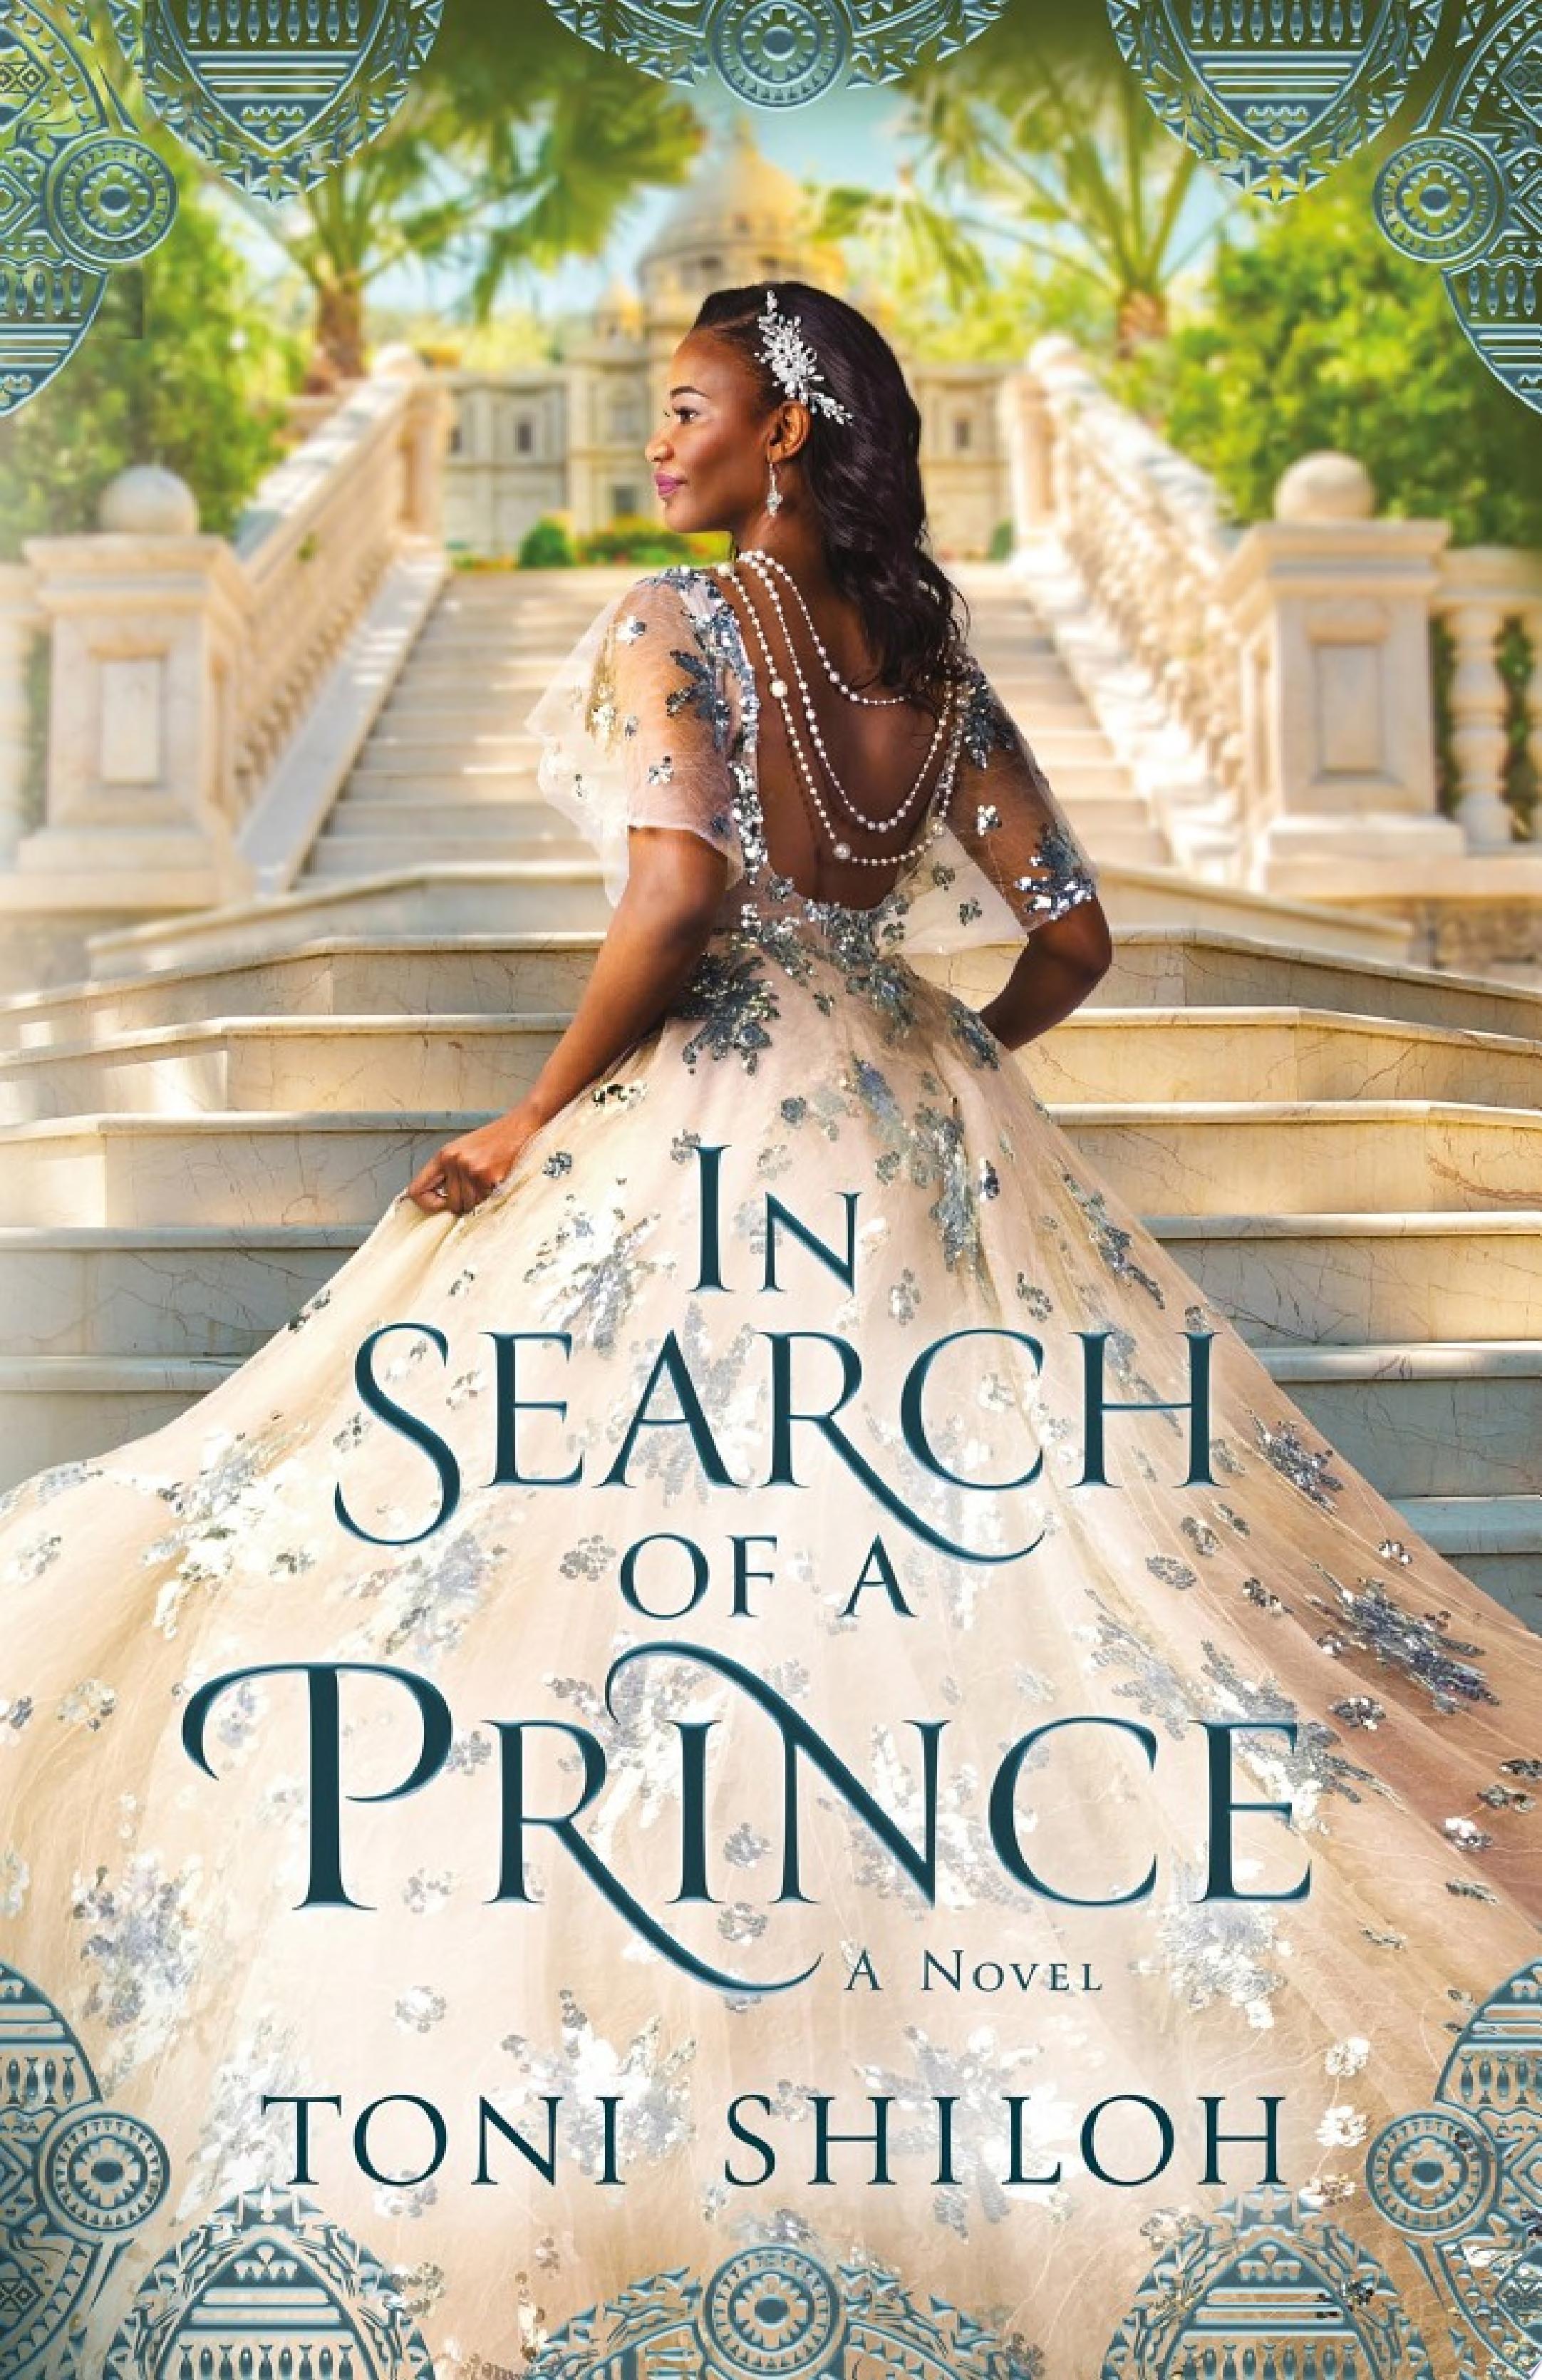 Image for "In Search of a Prince"